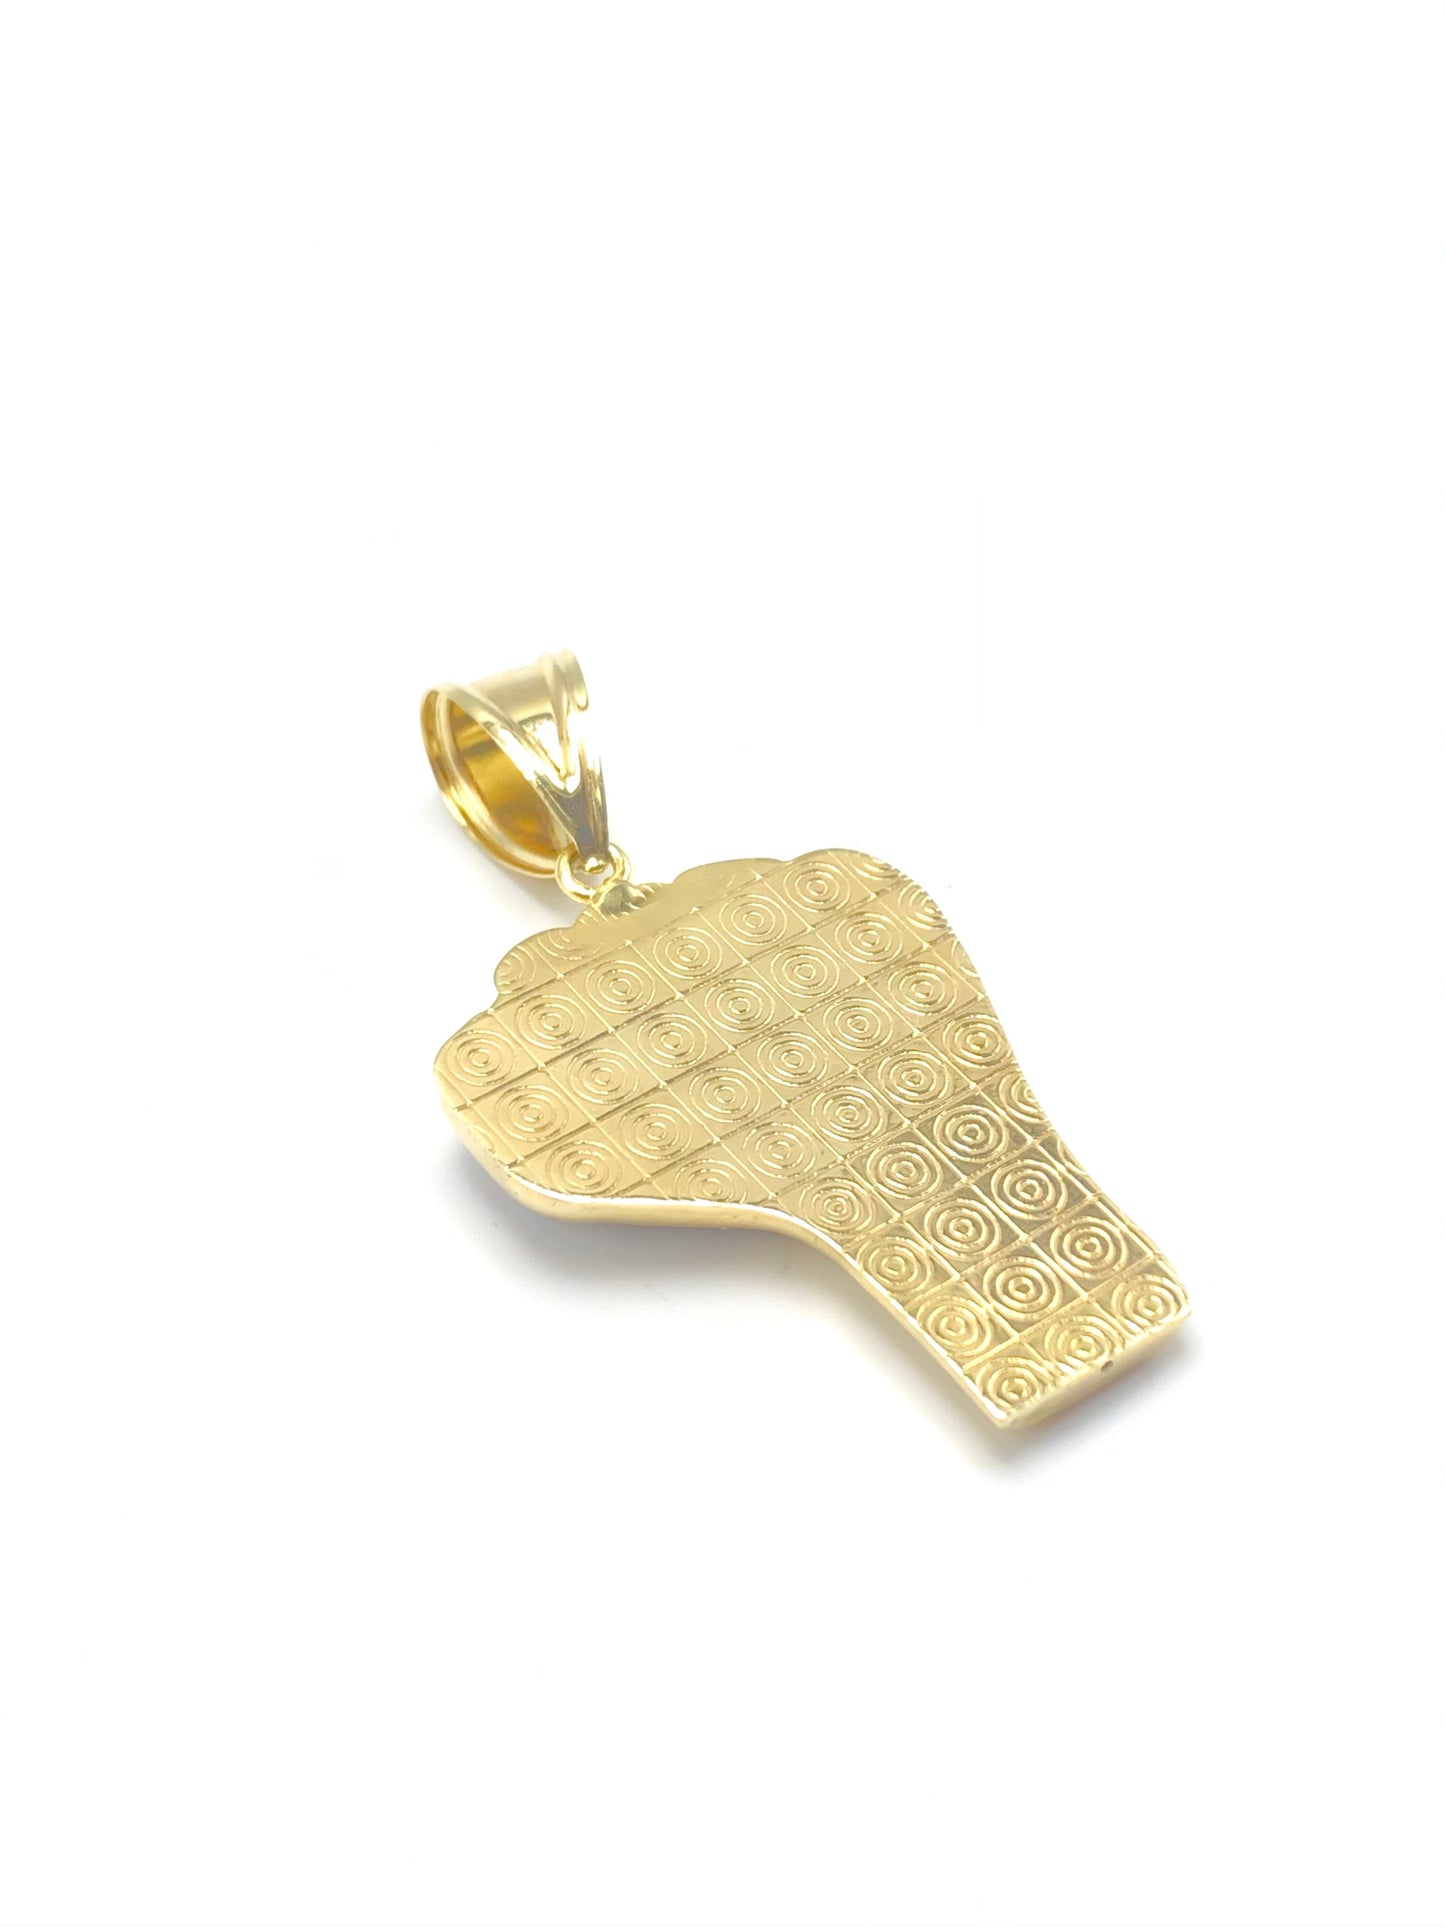 Two-Tone Gold Power Fist Pendant